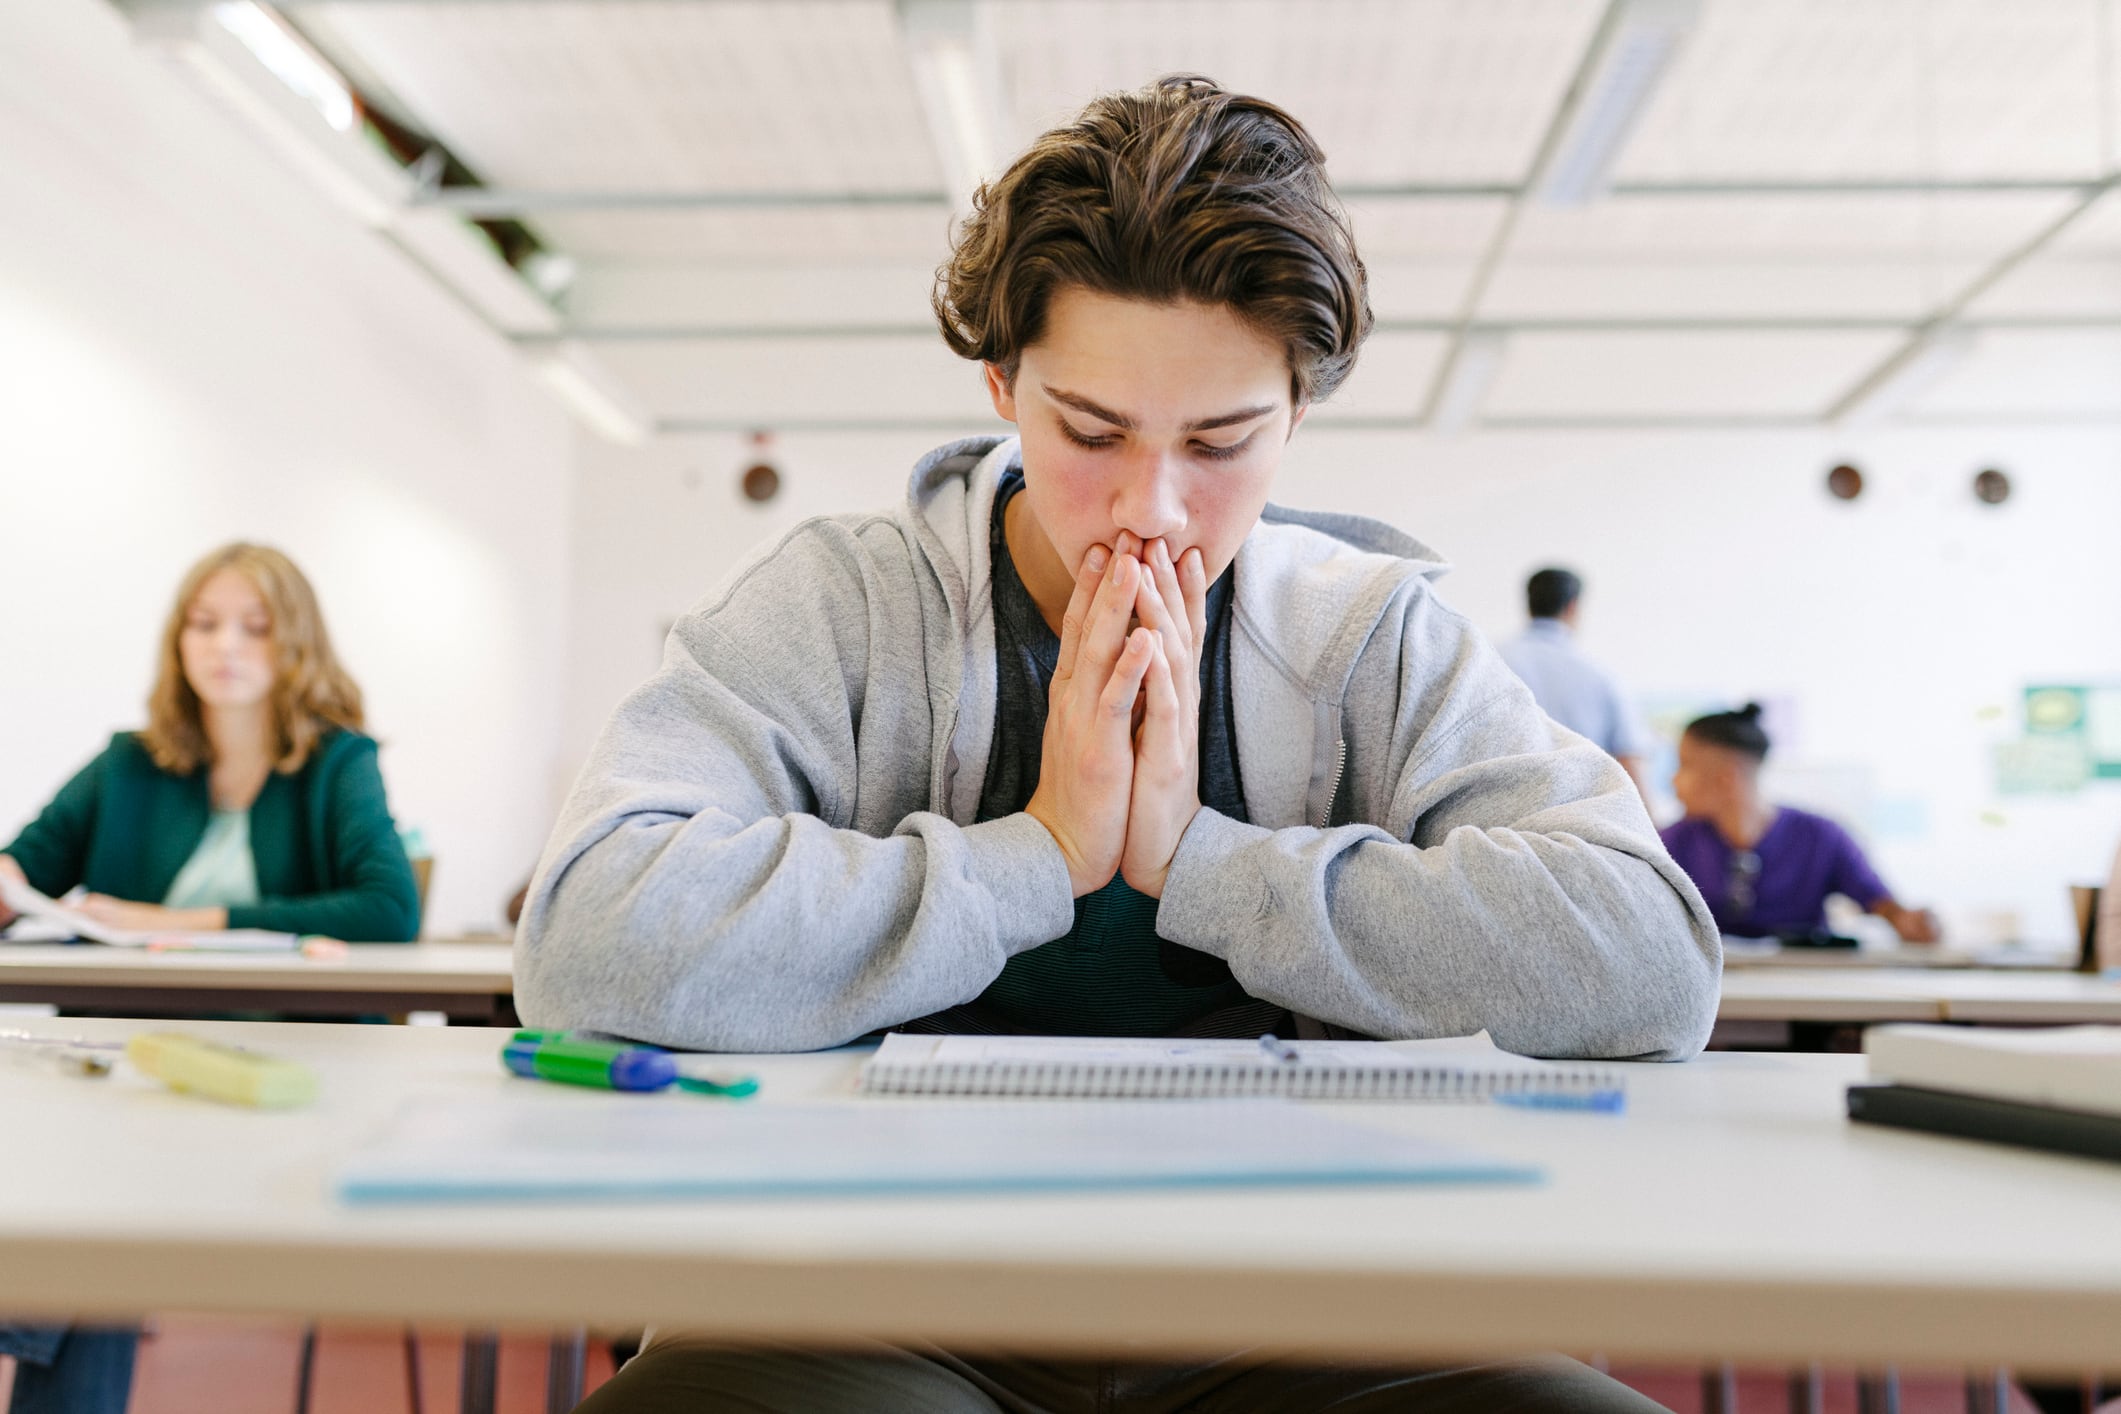 A student in a gray hoodie looks down at a paper exam. His hands are put together and resting against his chin and mouth.